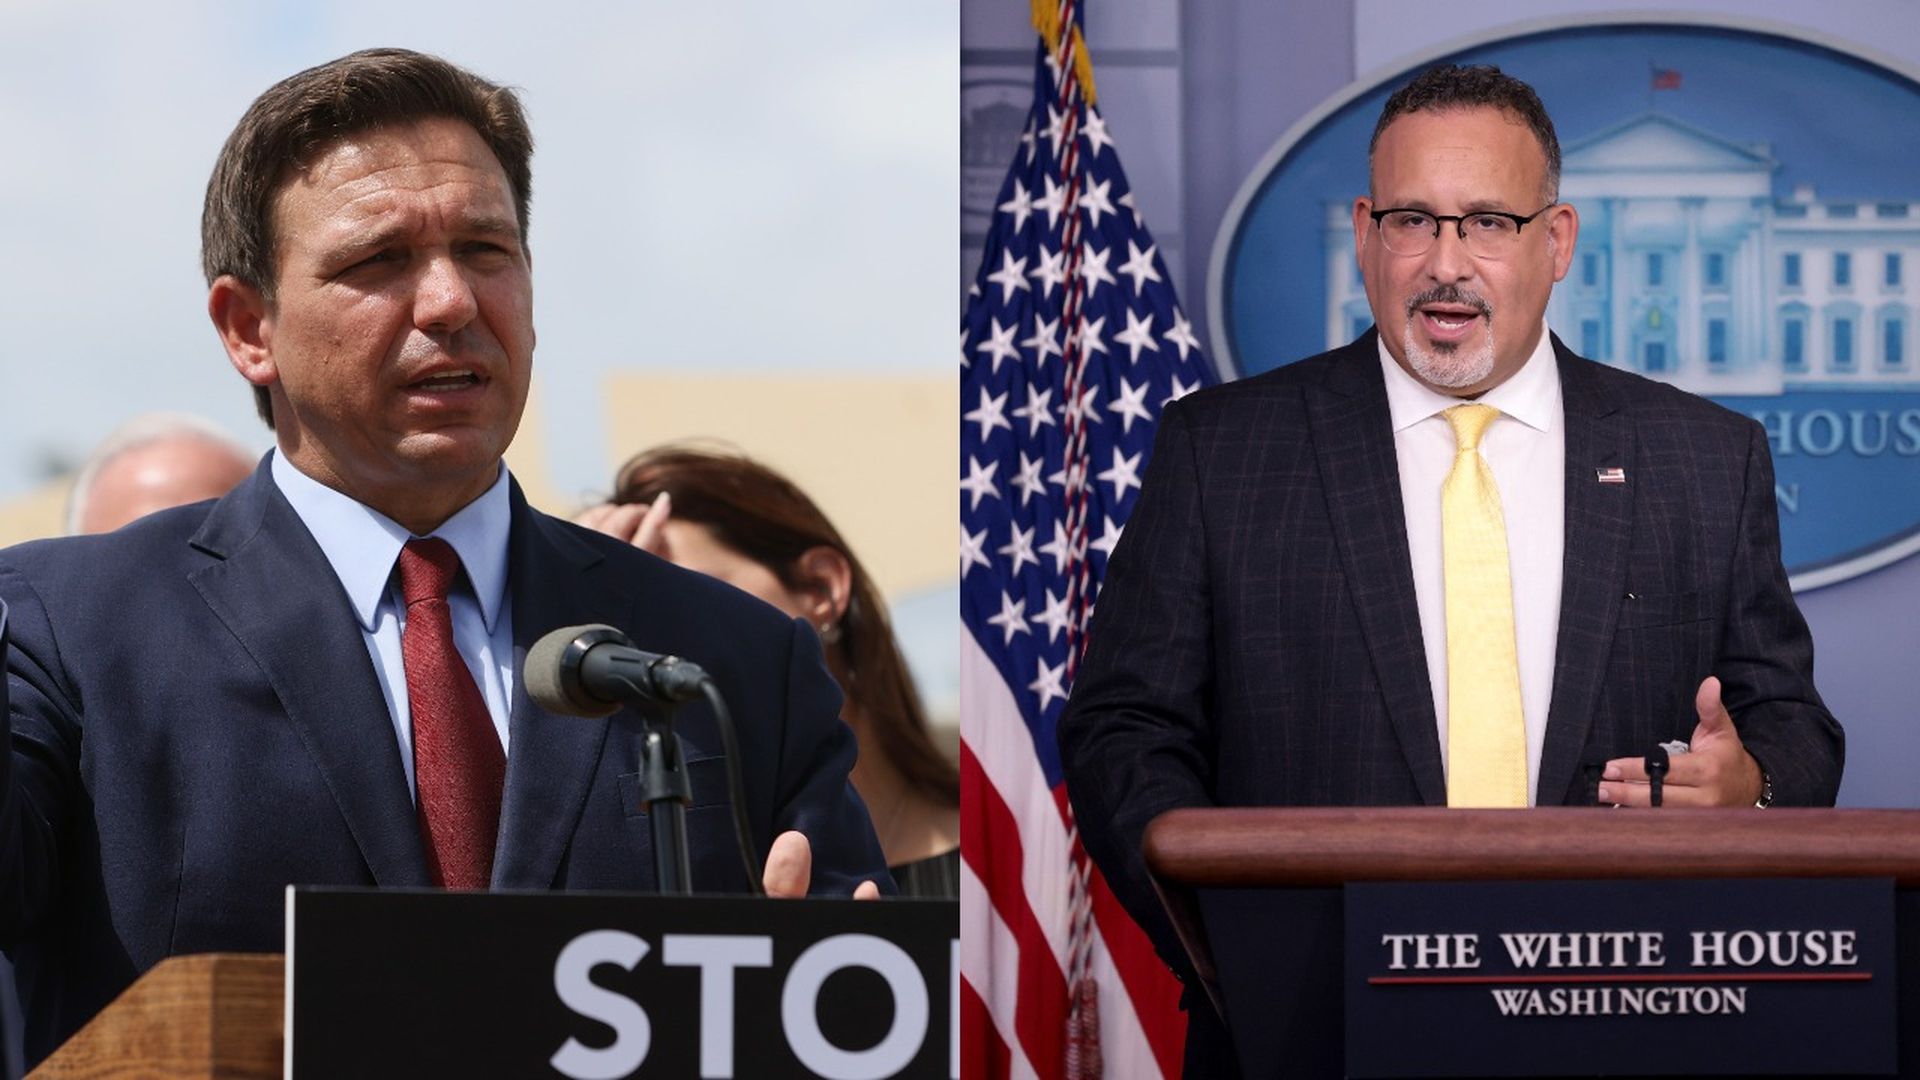 Photo of Ron DeSantis speaking from a podium on the left and Miguel Cardona speaking from a podium on the right